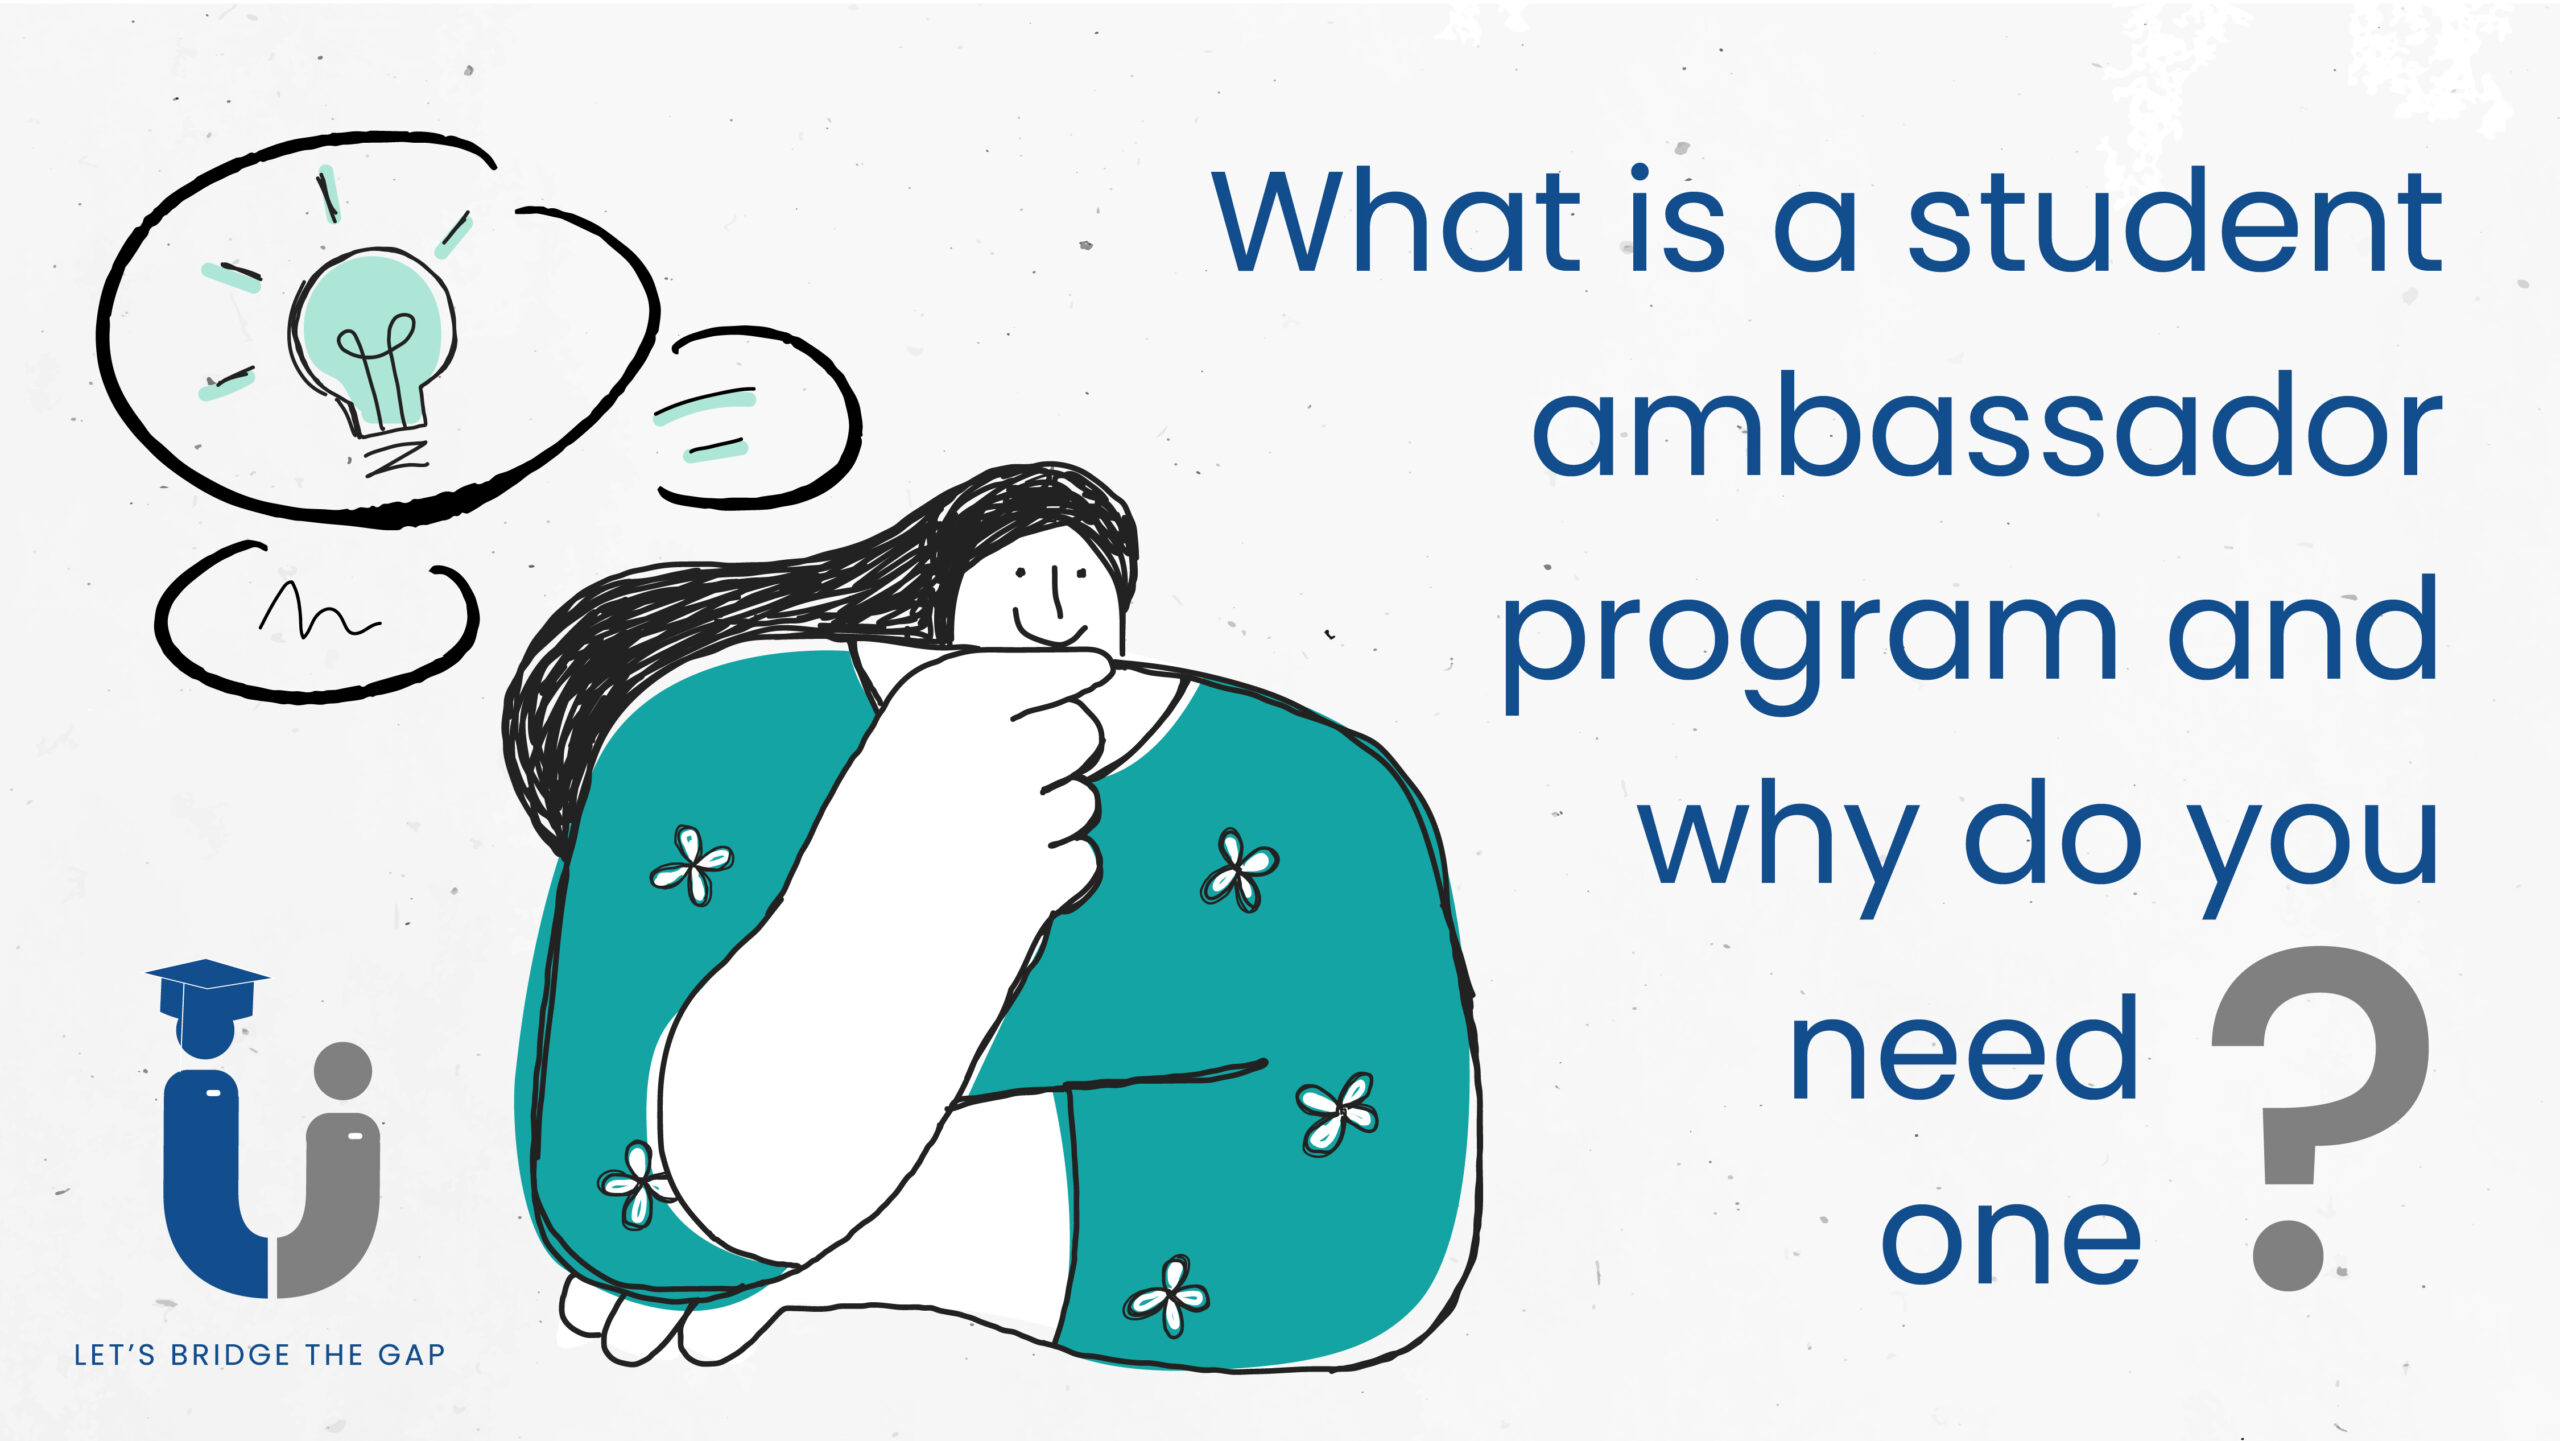 What is a student ambassador program,and why do you need one?